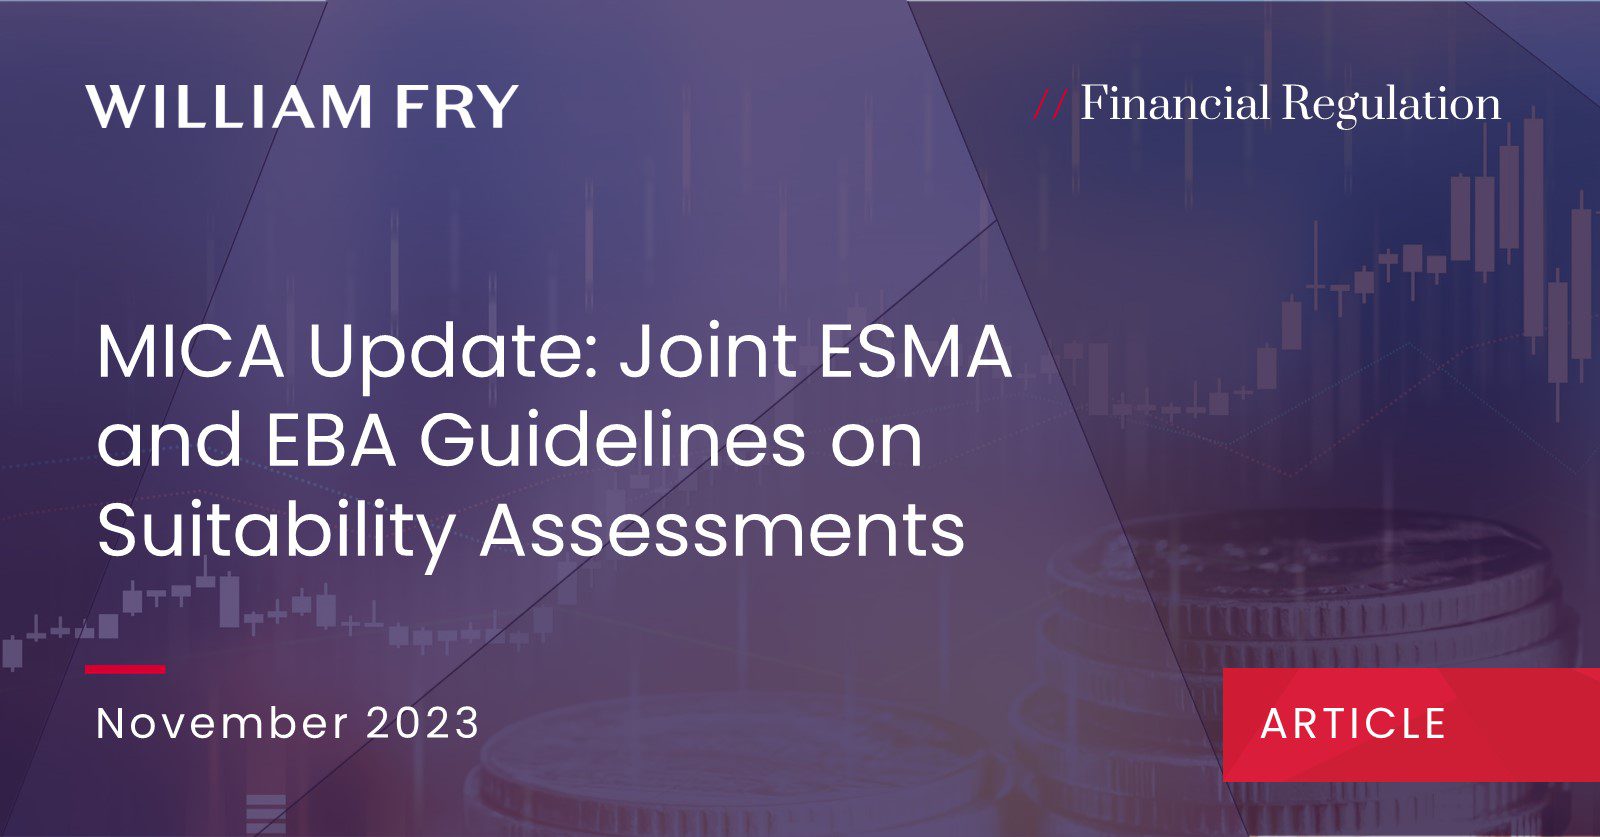 MICA Update Joint ESMA and EBA Guidelines on Suitability Assessments